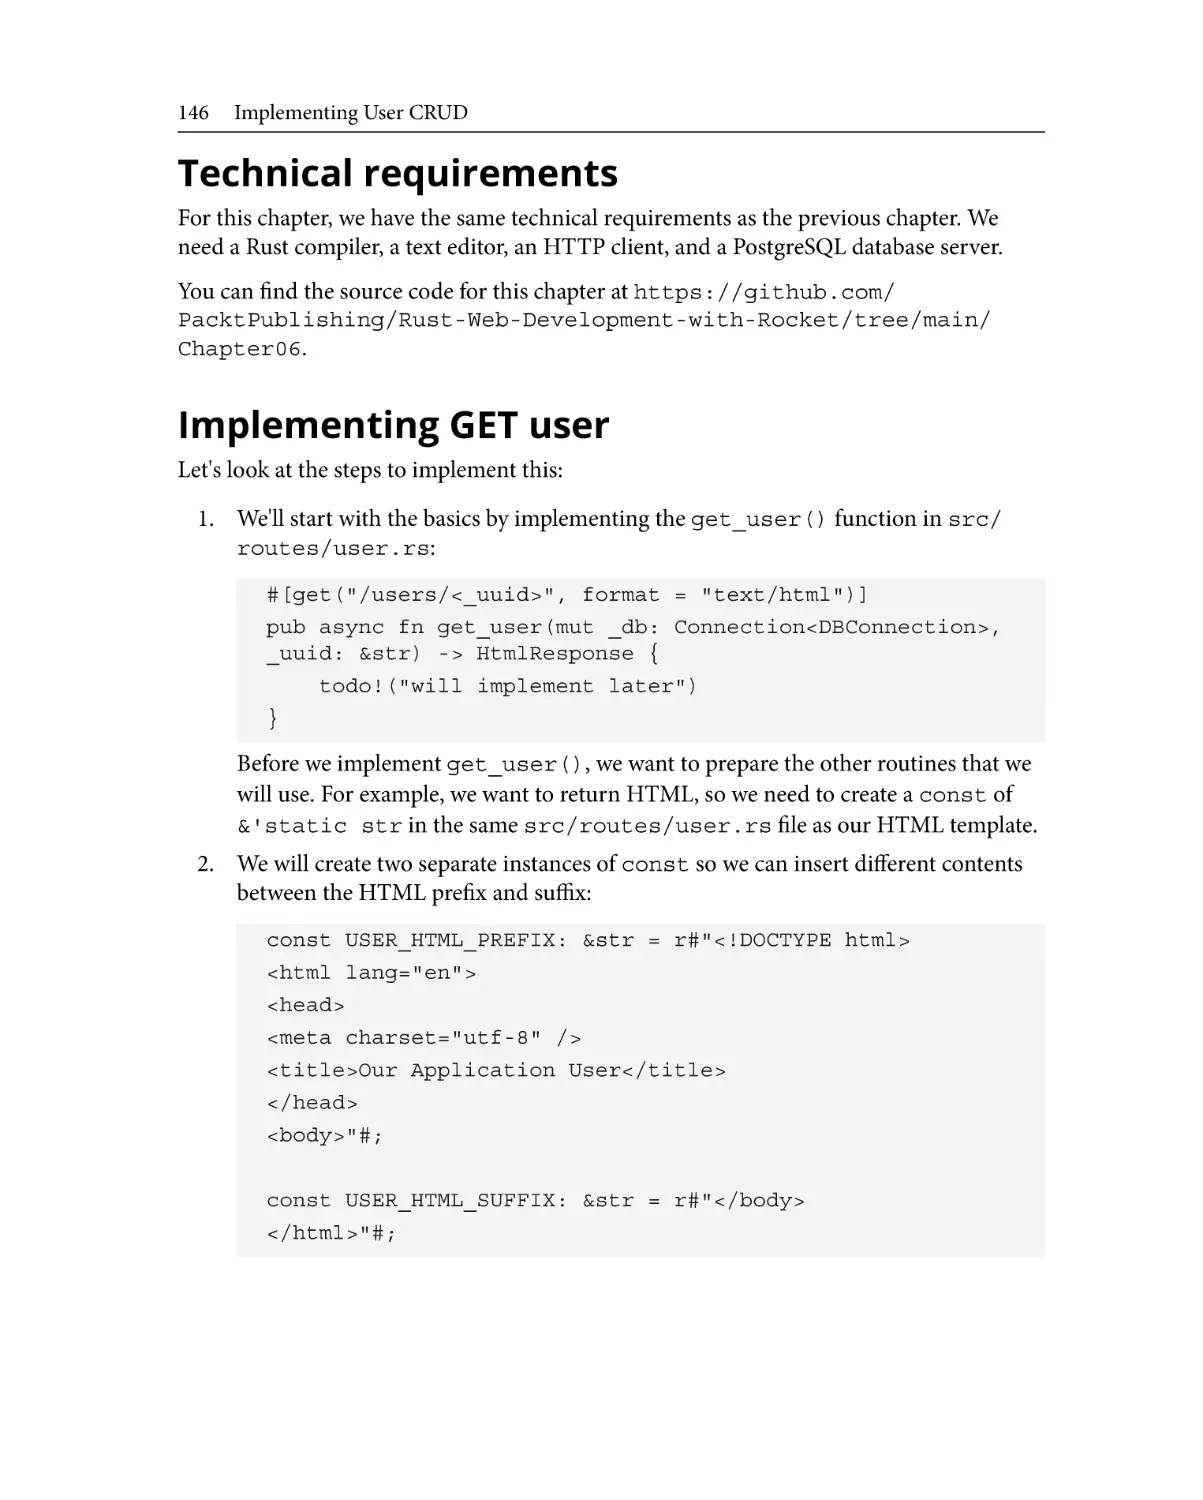 Technical requirements
Implementing GET user